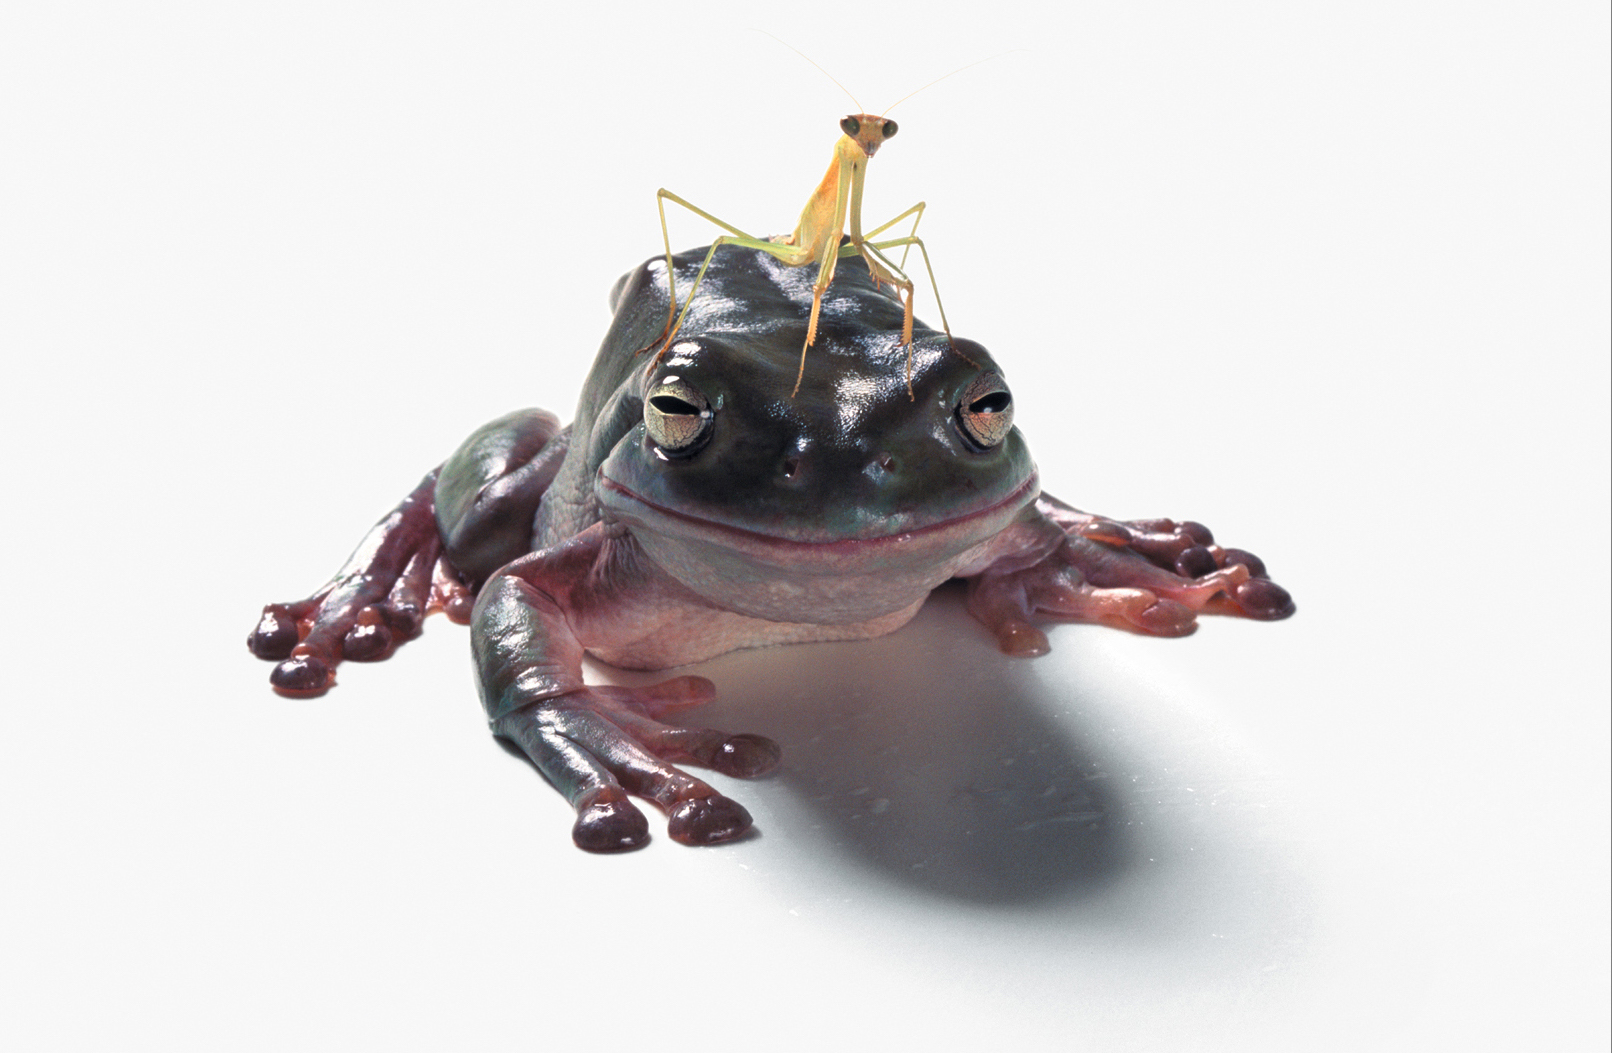 A praying mantis sits on the head of a frog